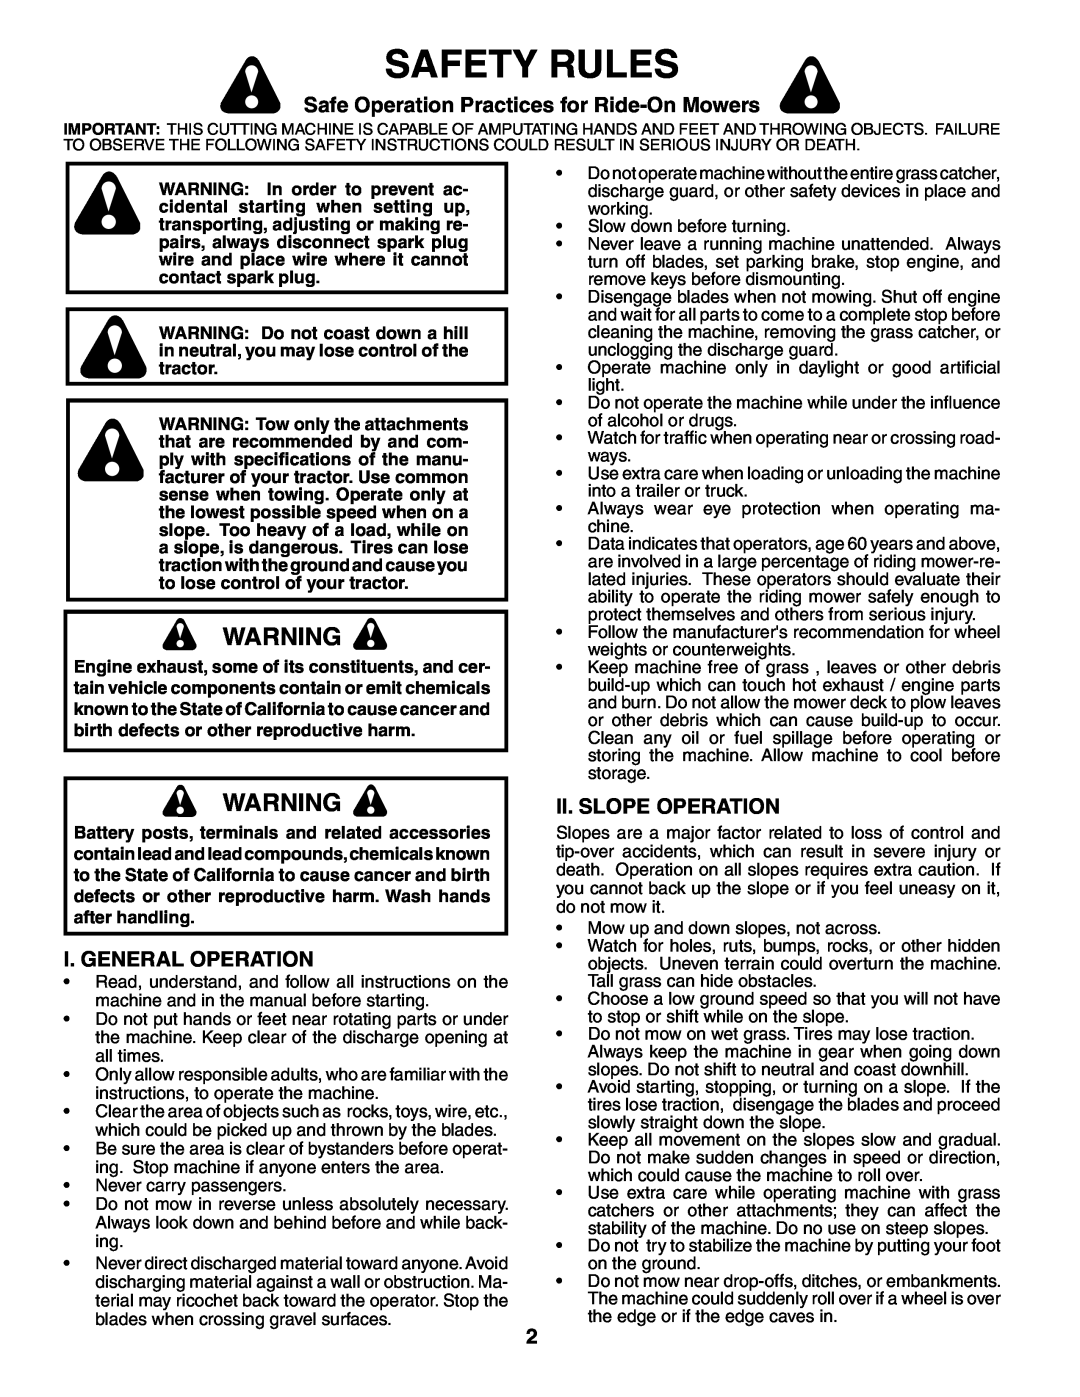 Poulan XT24H42YT manual Safety Rules, Safe Operation Practices for Ride-OnMowers, I. General Operation, Ii. Slope Operation 